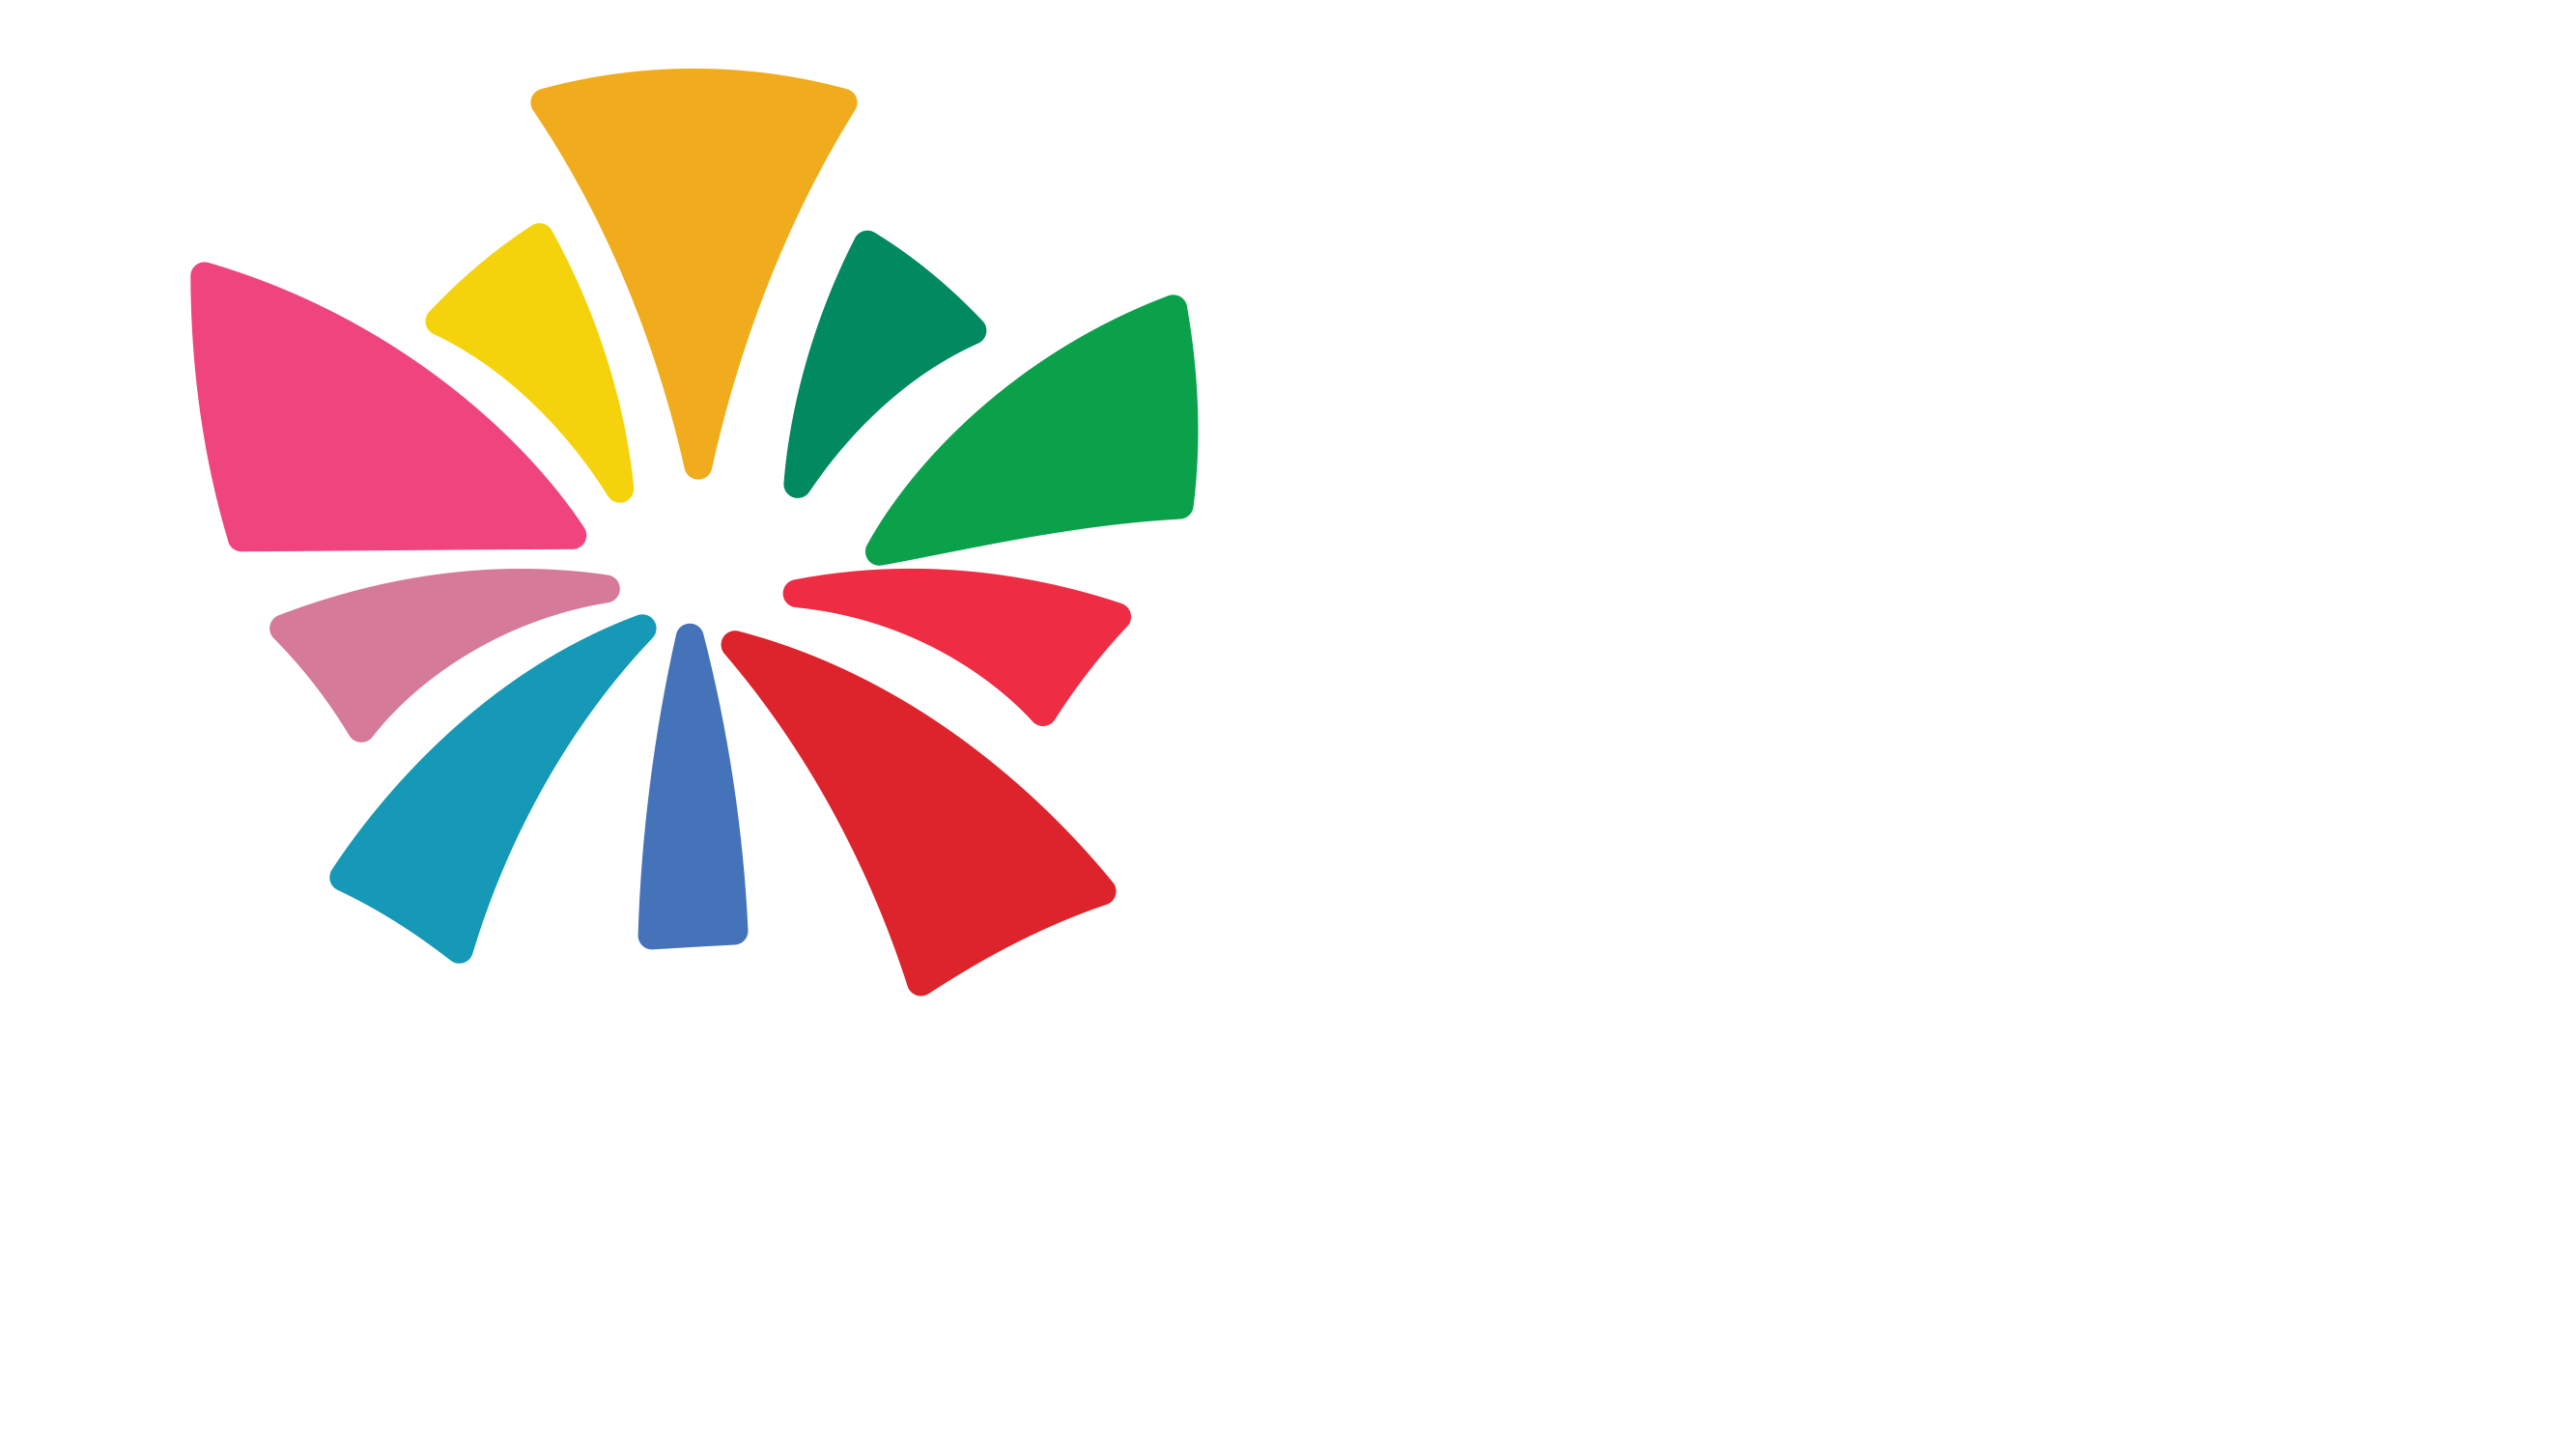 It's a splash of colour with the words Community Resource Unit Inc. Expanding Ideas. Creating change